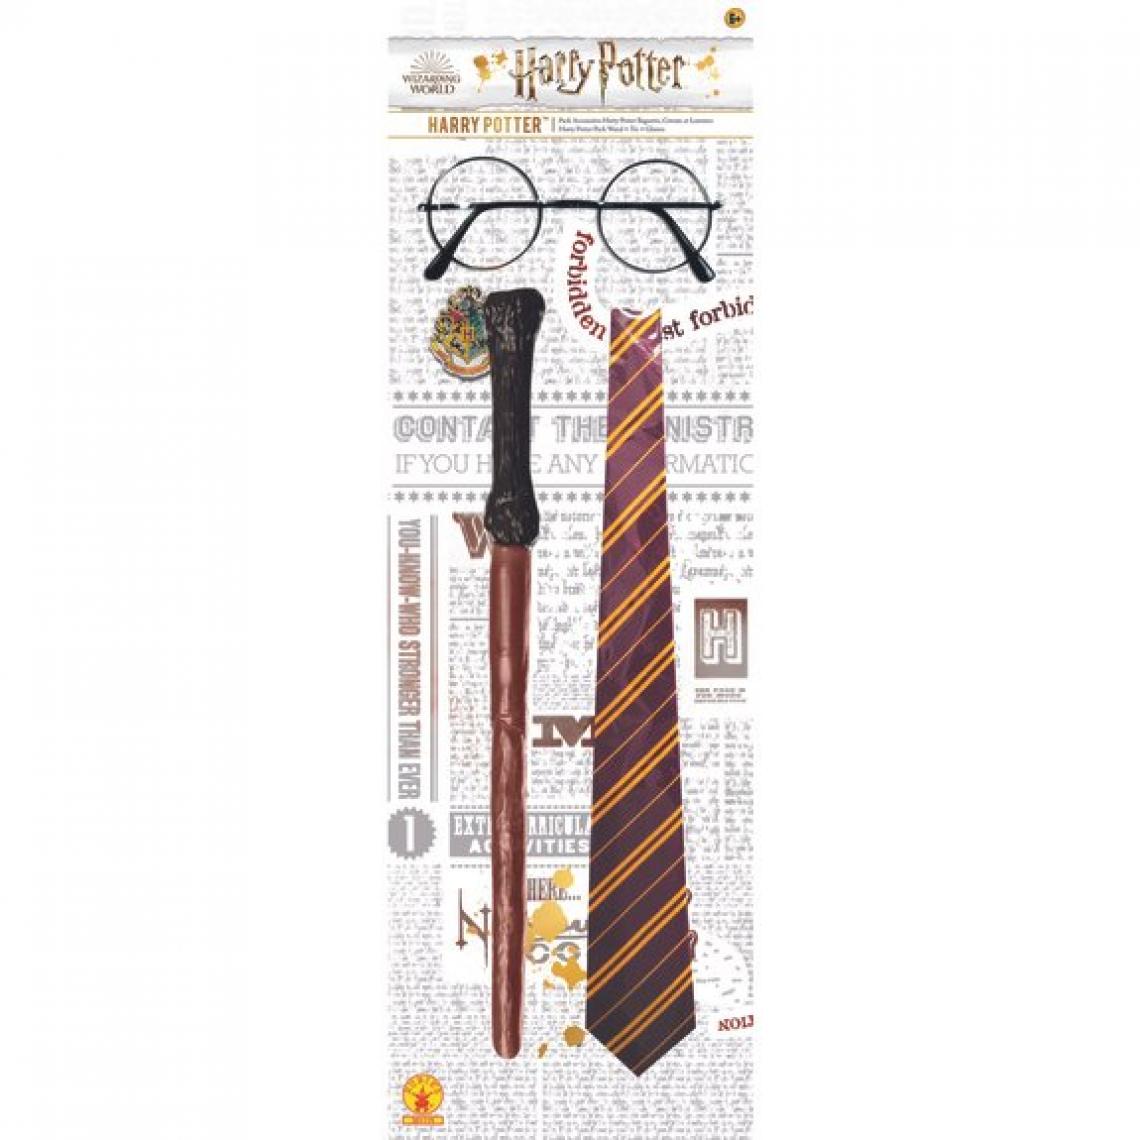 Ludendo - Pack lunettes baguette cravate Hary Potter - Maquillage et coiffure